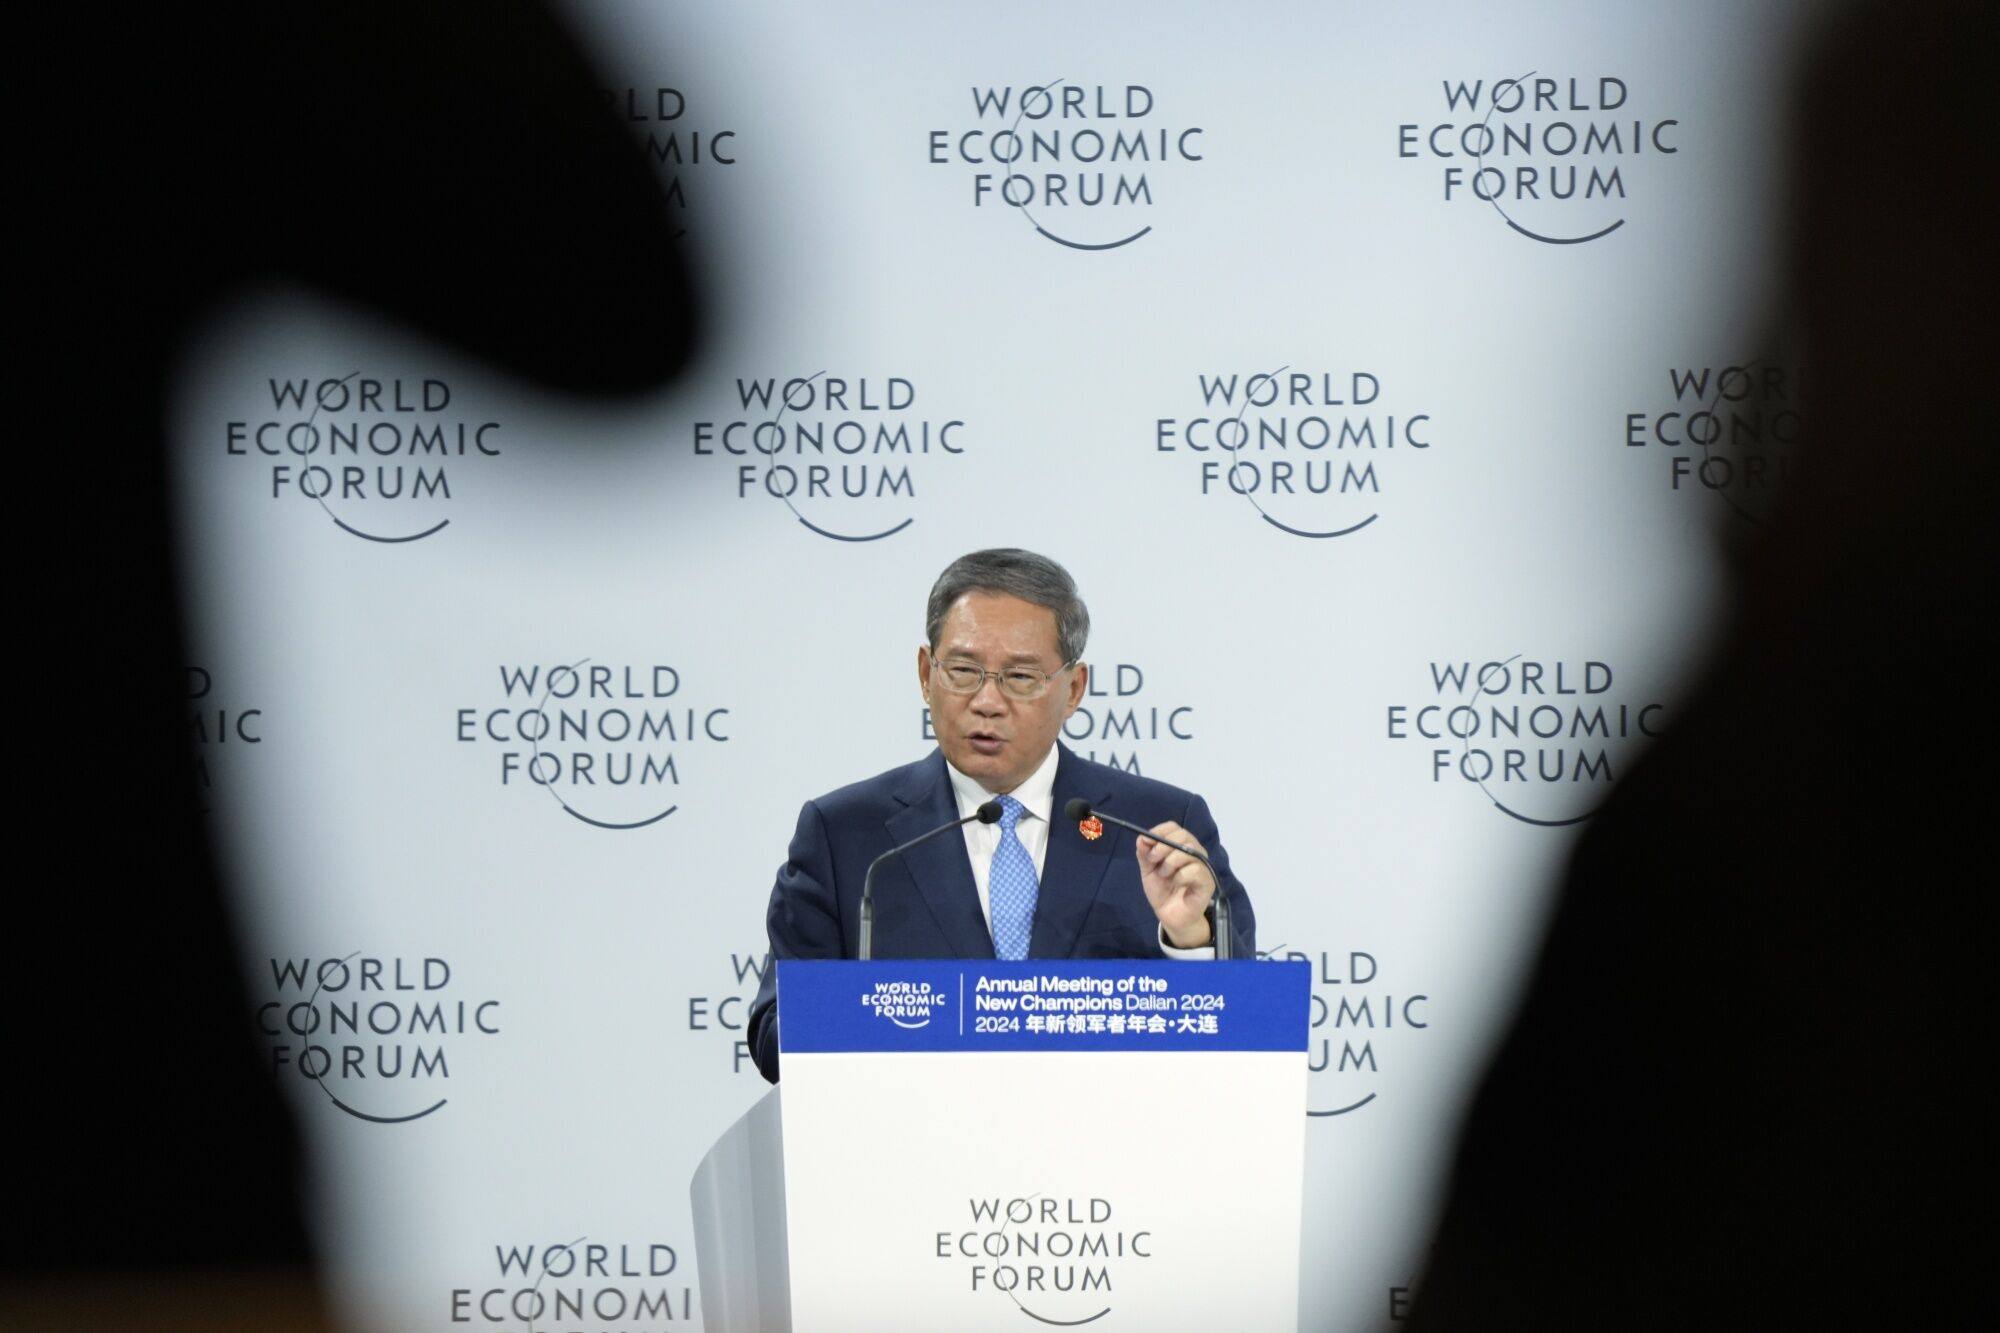 Chinese Premier Li Qiang criticised Western trade practices while praising his country’s open market during a keynote address on Tuesday. Photo: Bloomberg